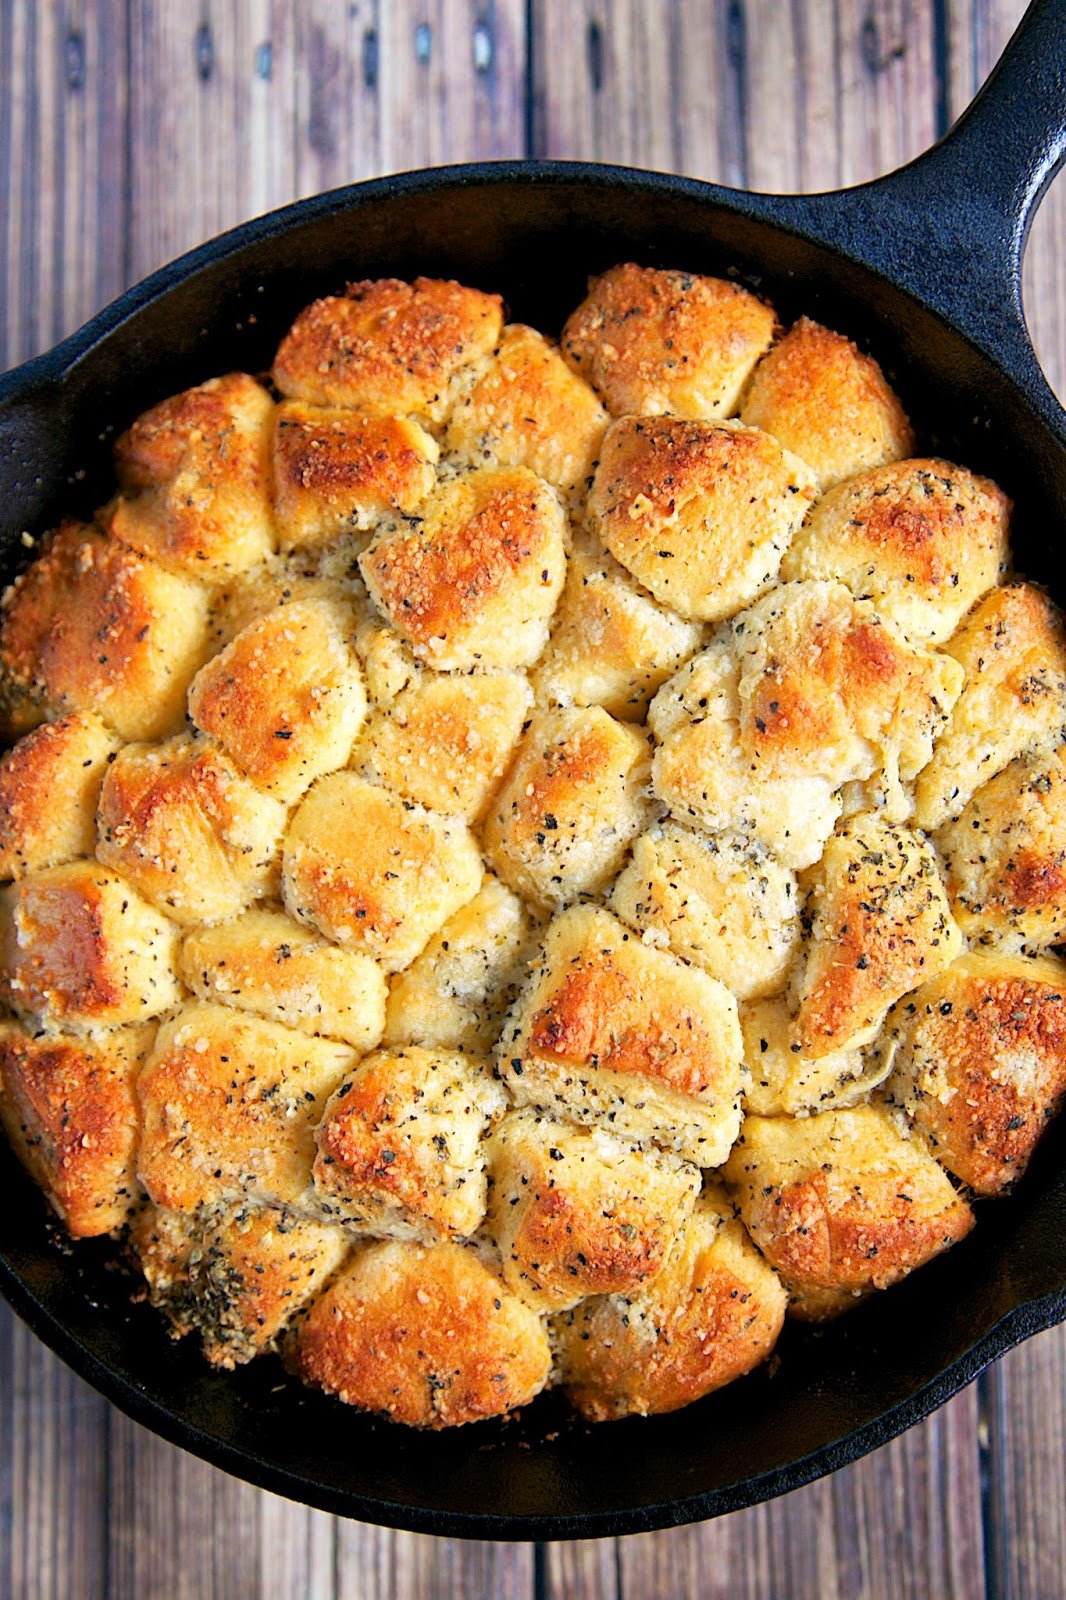 Garlic Parmesan Skillet Bread - refrigerated biscuits chopped and tossed in butter, garlic, italian seasoning and parmesan cheese. Baked in a small iron skillet. Great with pasta. Can also use as an appetizer with some warm pizza sauce. YUM!! I can make a meal out of this yummy bread!